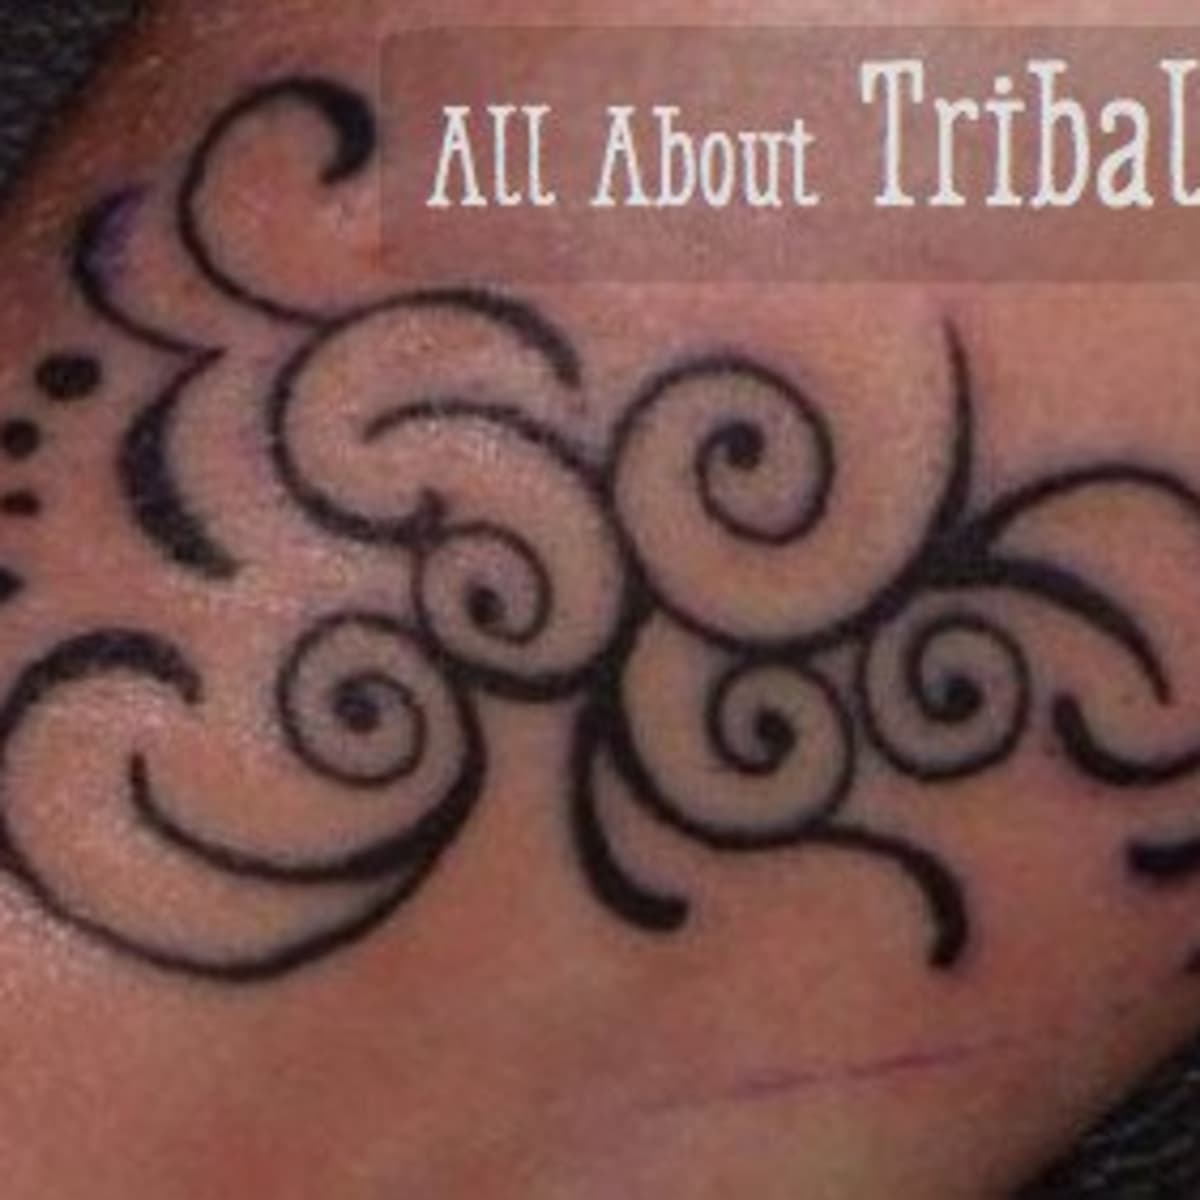 tribal symbol tattoos and their meanings